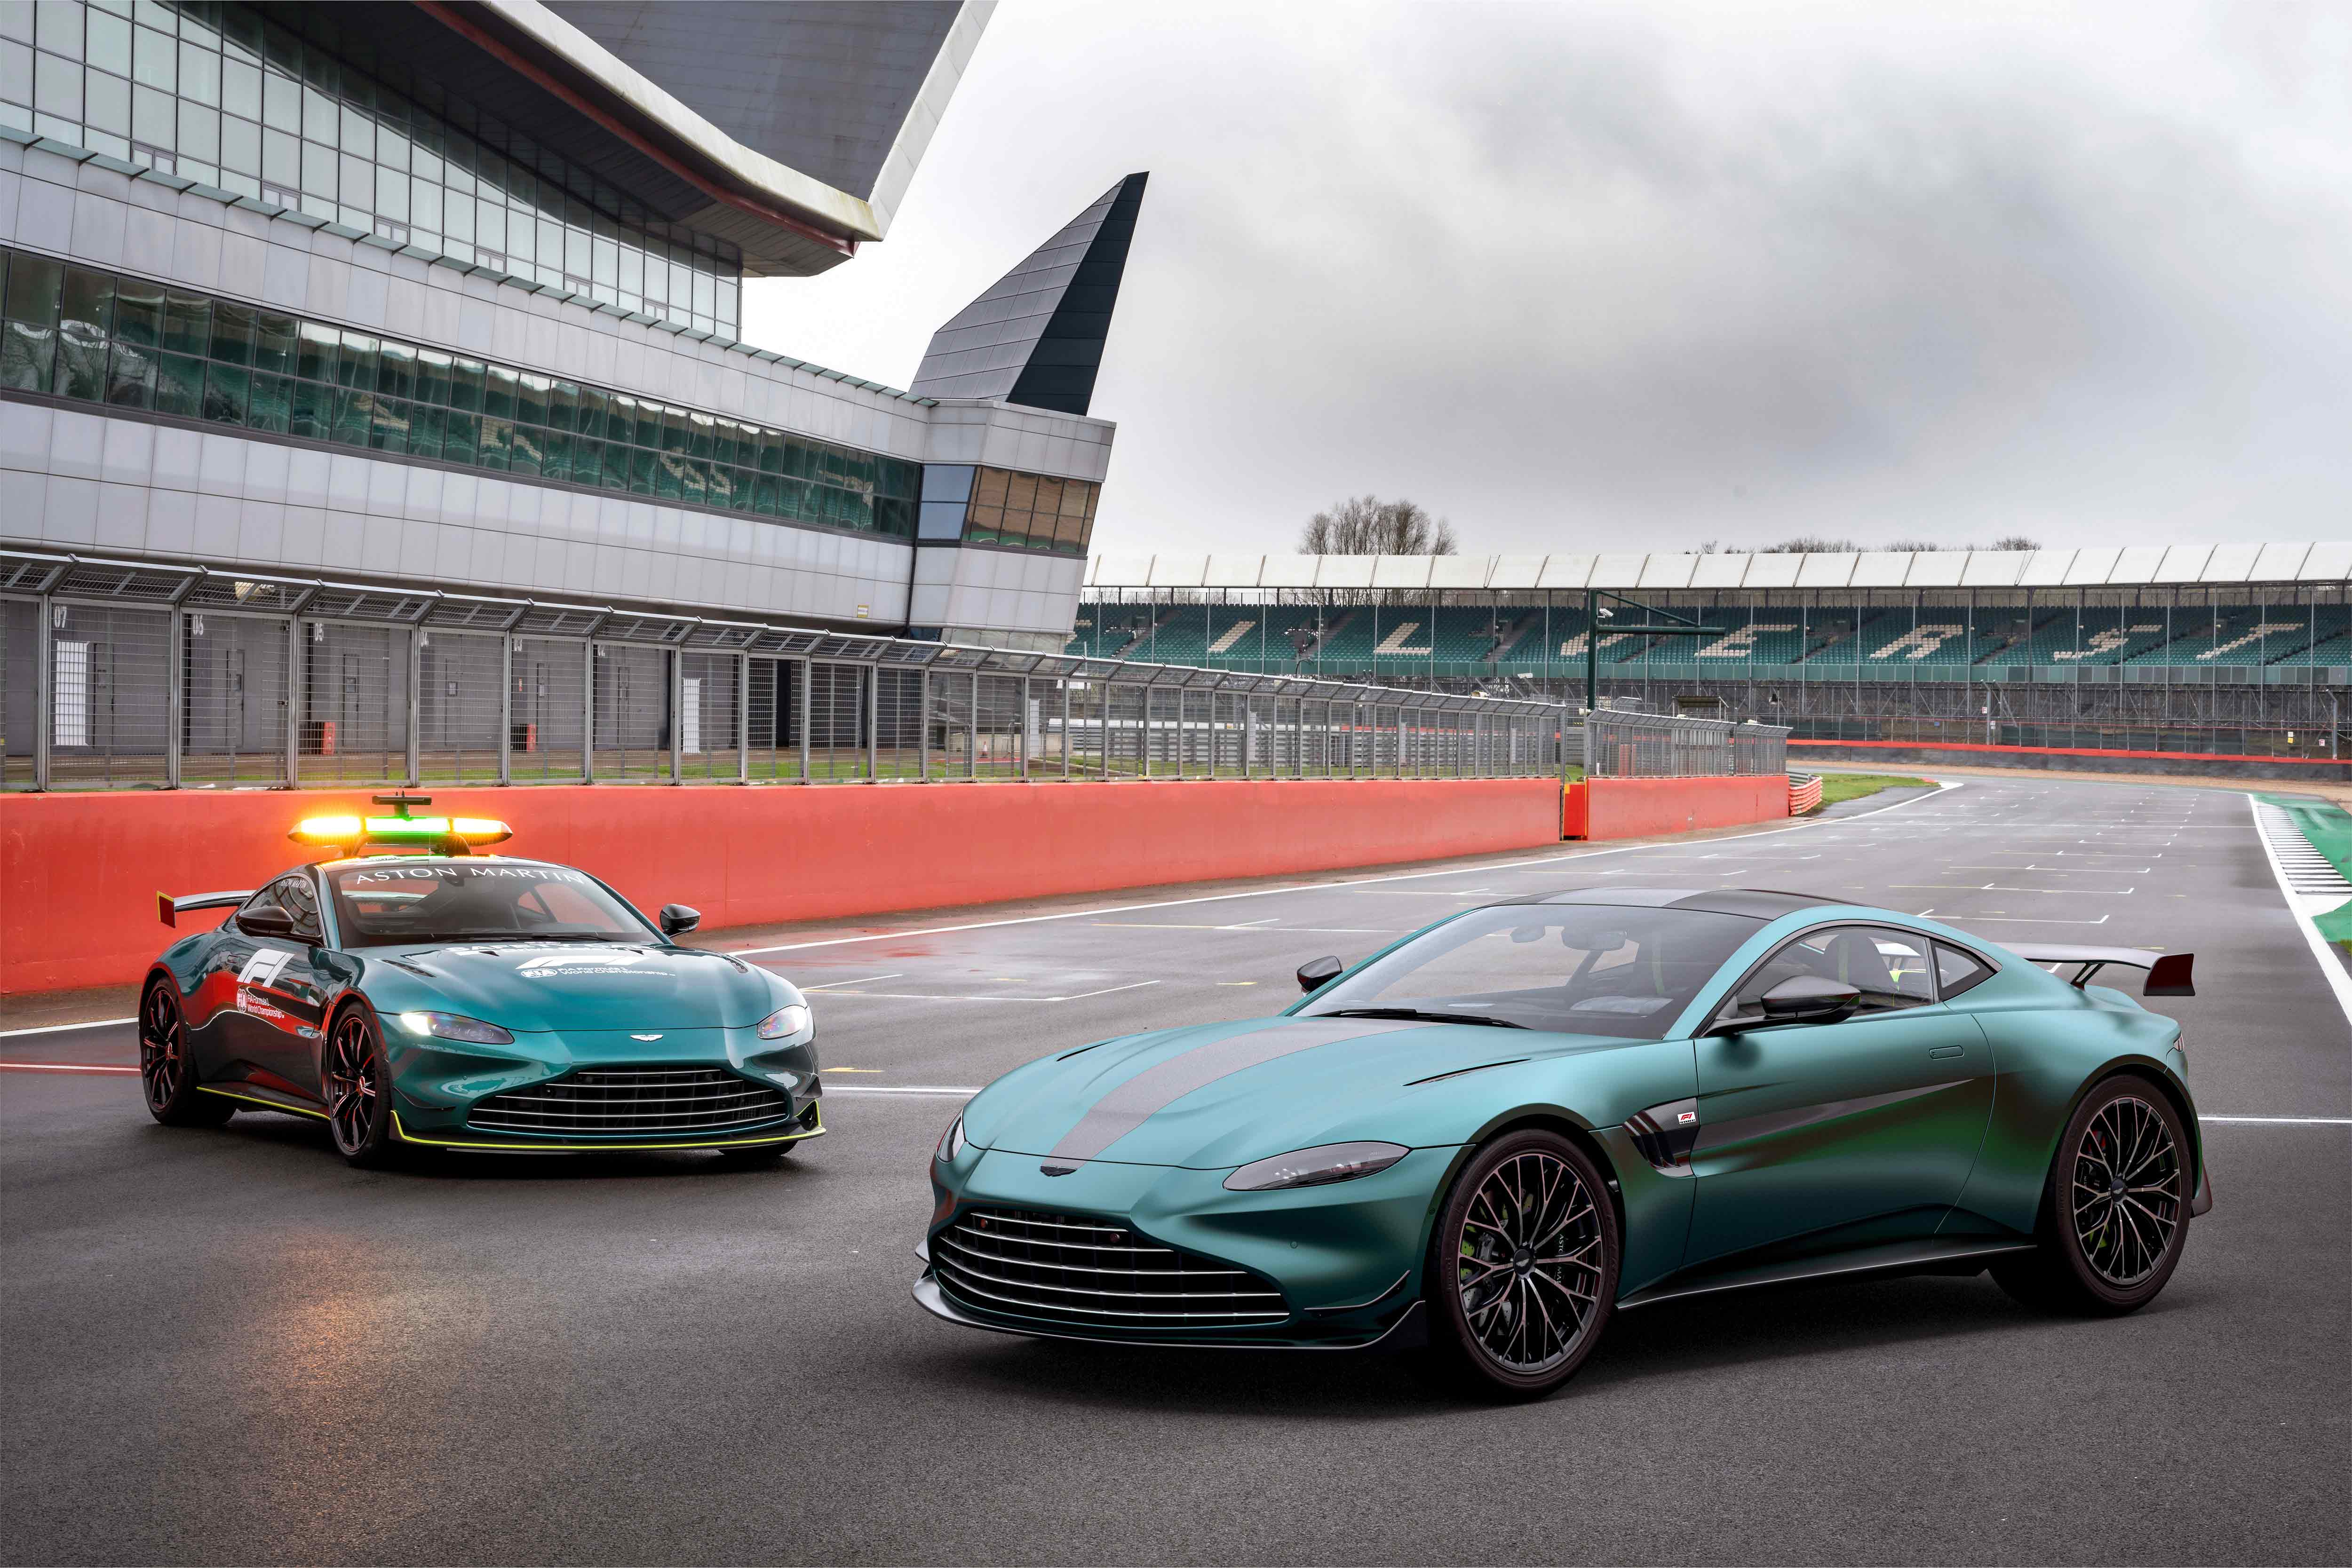 Introducing the Vantage F1 Edition